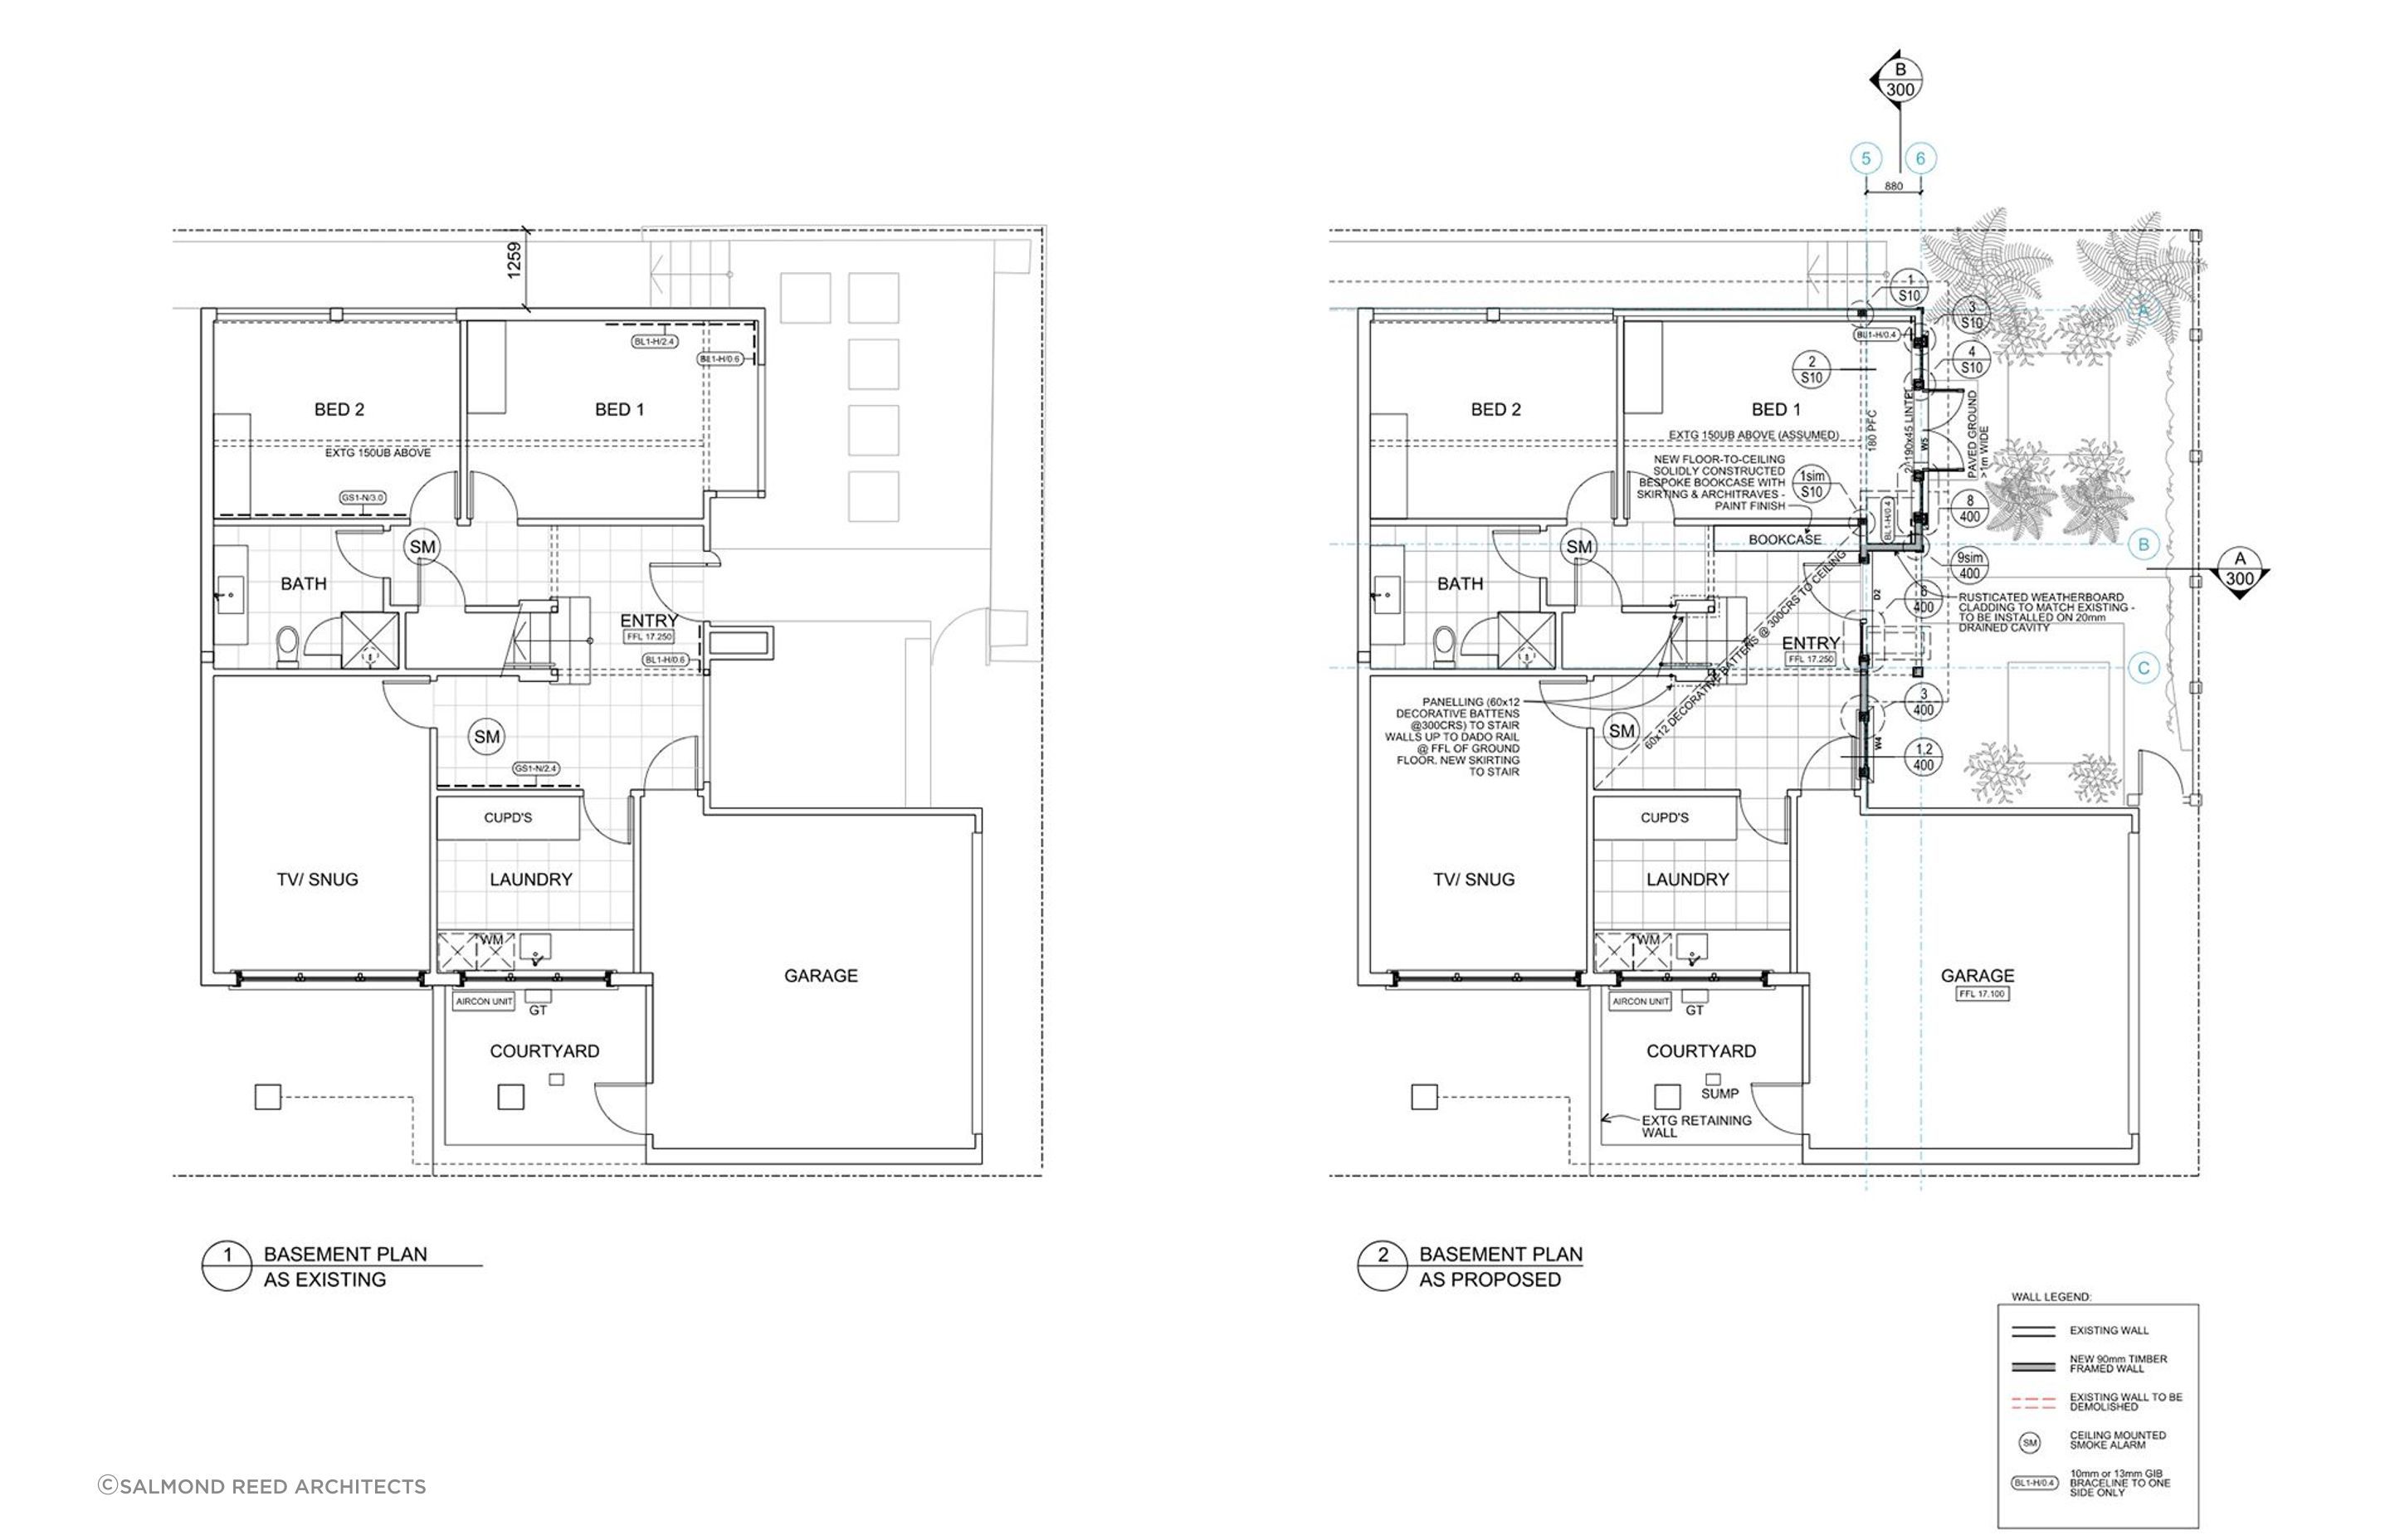 The existing and new basement plans, by Salmond Reed Architects.